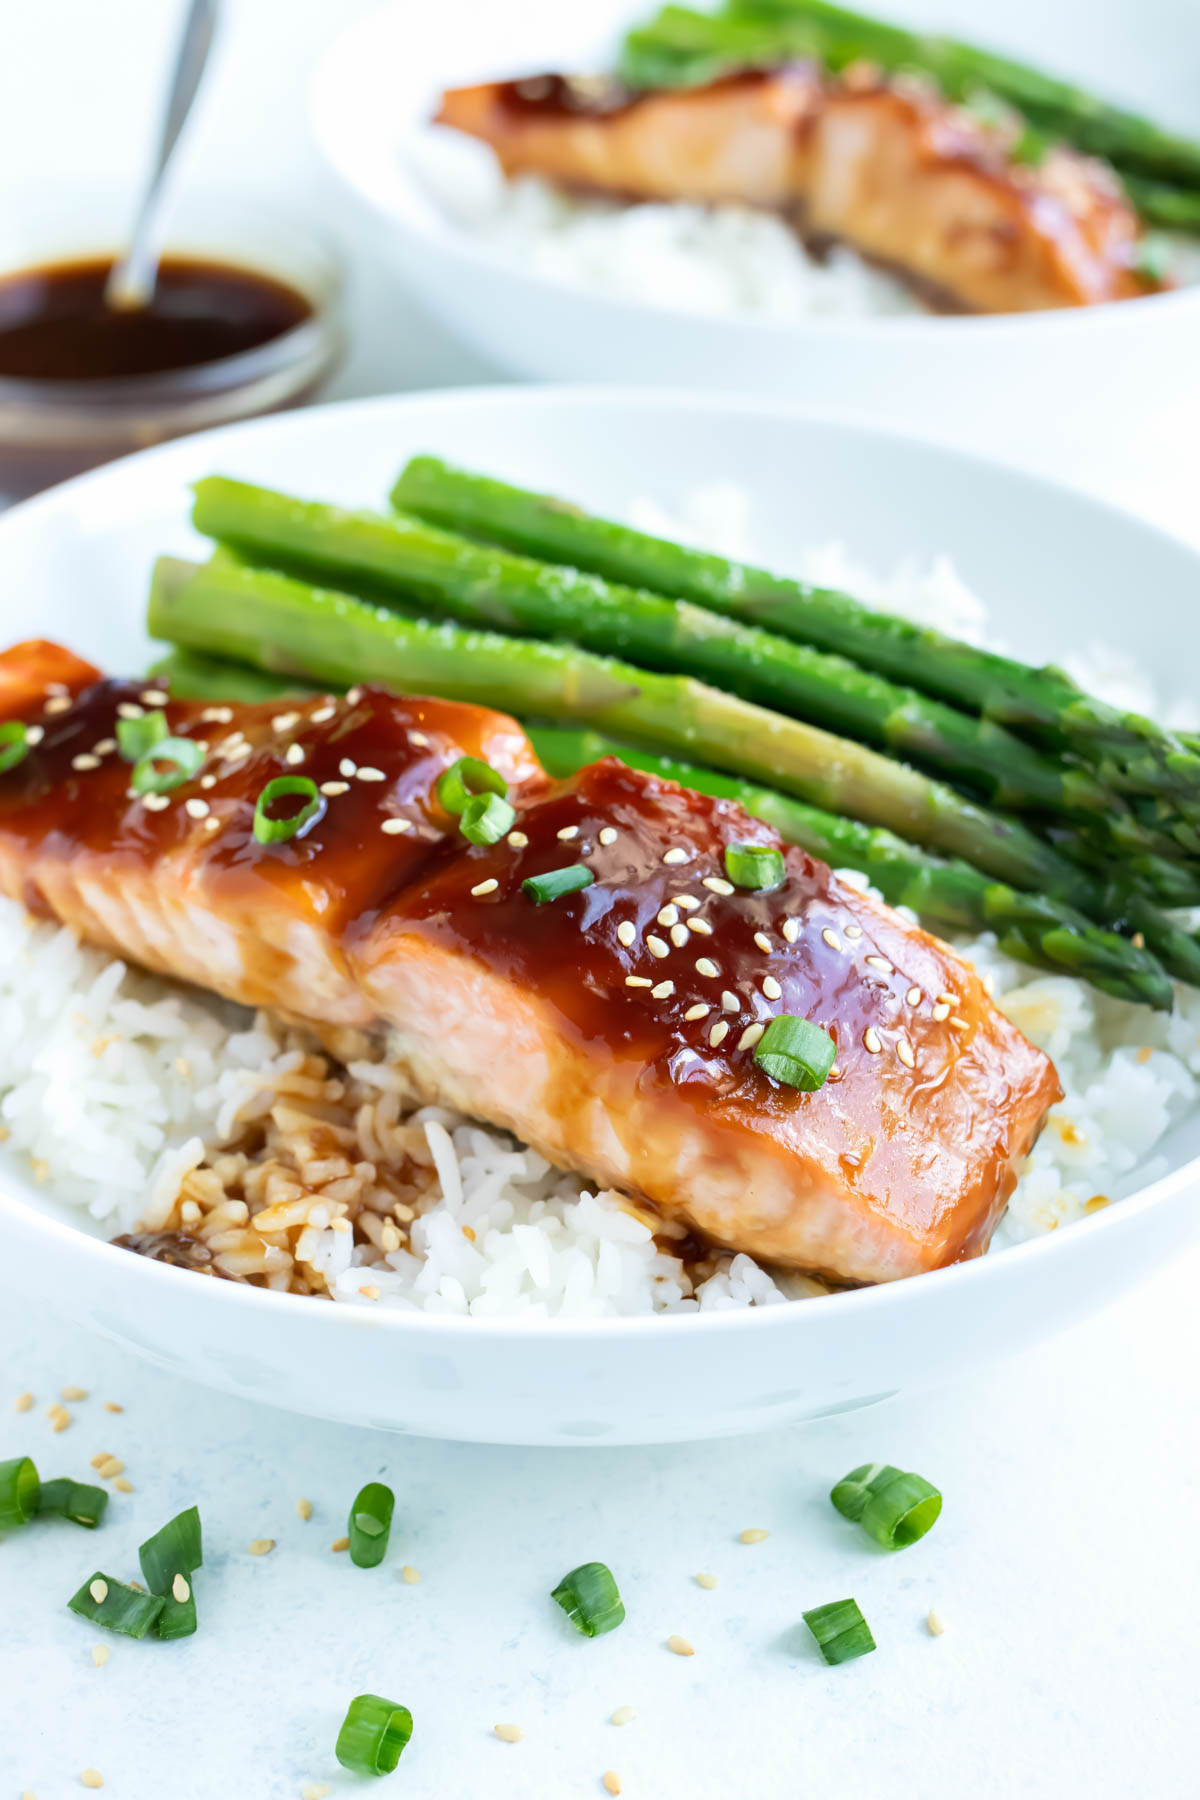 Teriyaki salmon is served on top of fluffy white rice.